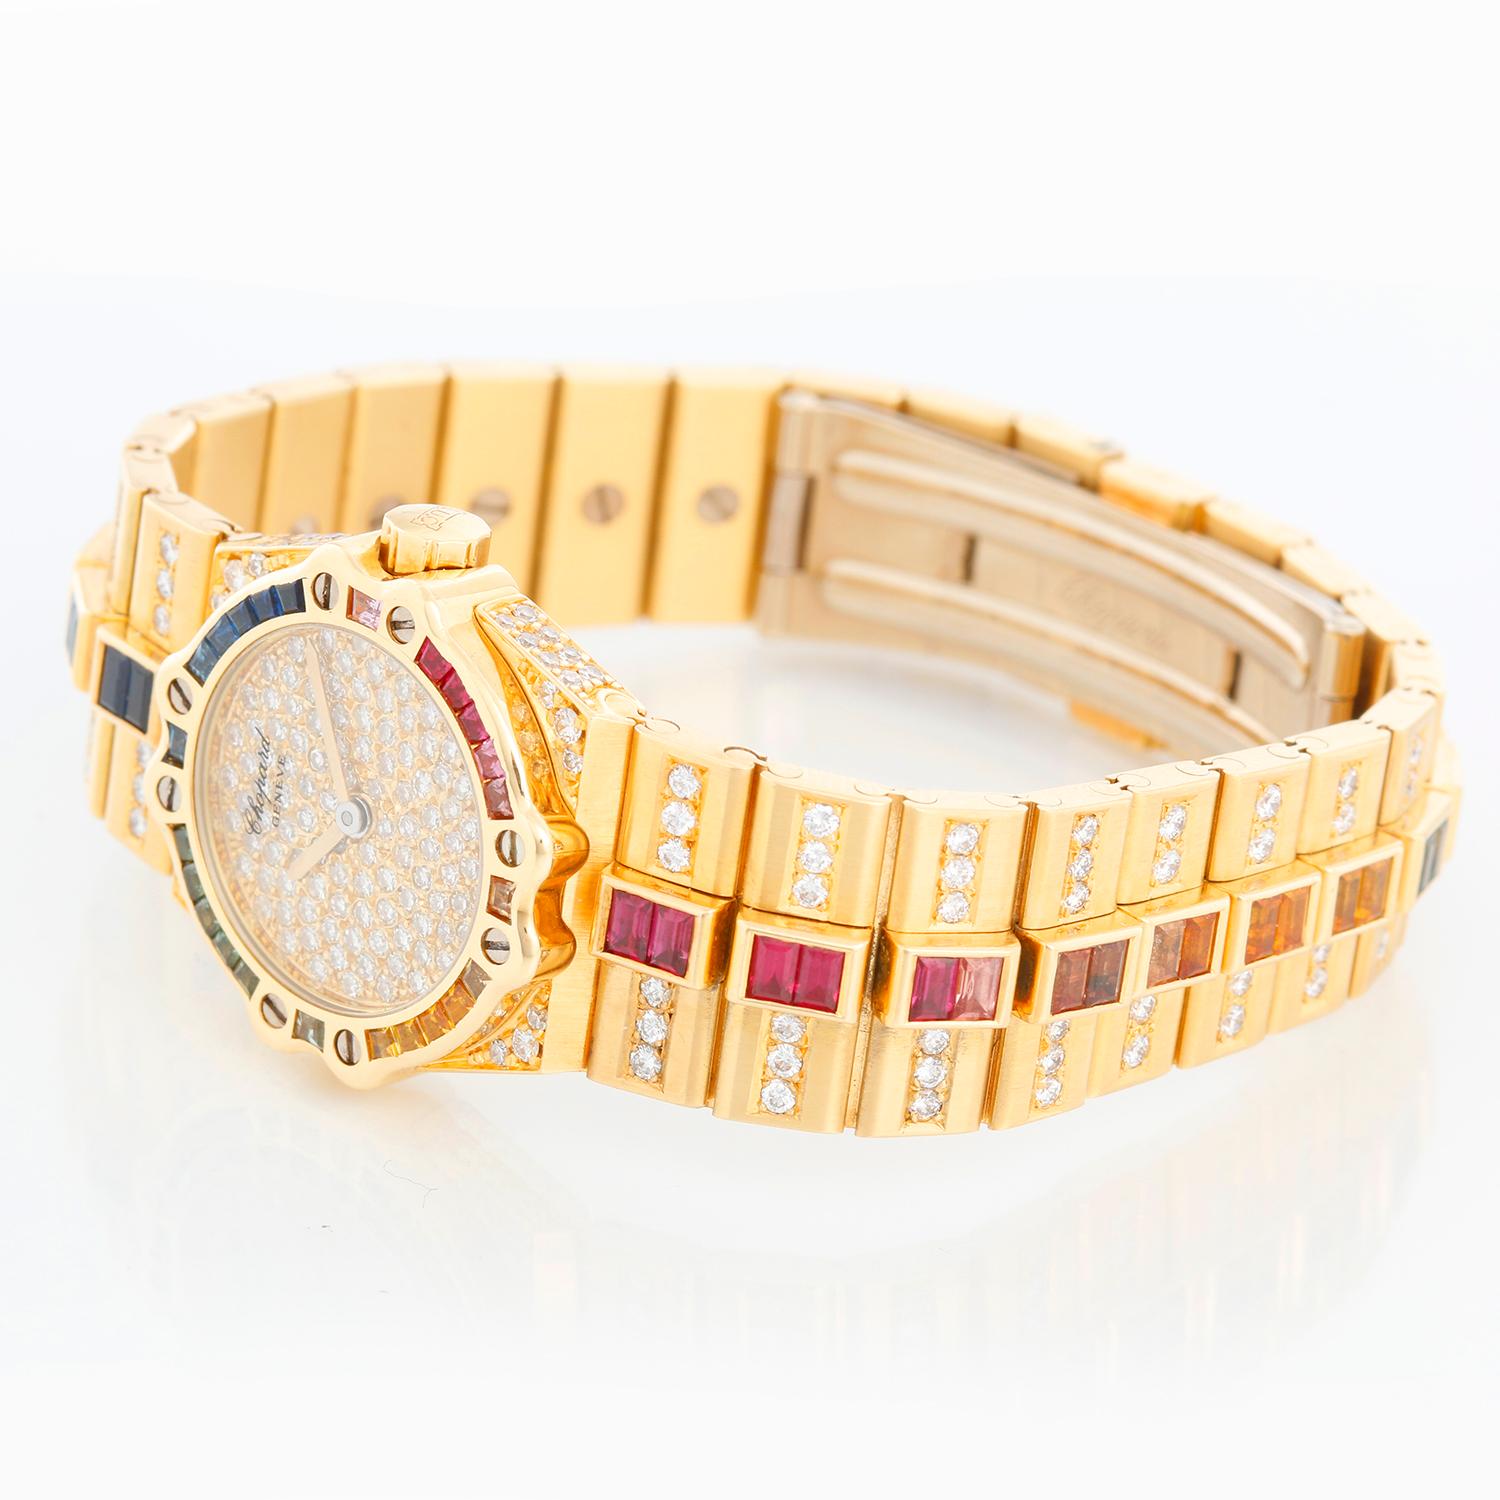 Chopard St. Moritz 18k Yellow Gold Diamond Ladies Watch 25/4334 24 - Quartz. 18K Yellow gold with rainbow bezel ( 24.5 mm ) . Pave Diamond dial . 18k yellow gold link style bracelet with rainbow sapphires (will fit apx. 6 1/2 inch wrist). Pre-owned